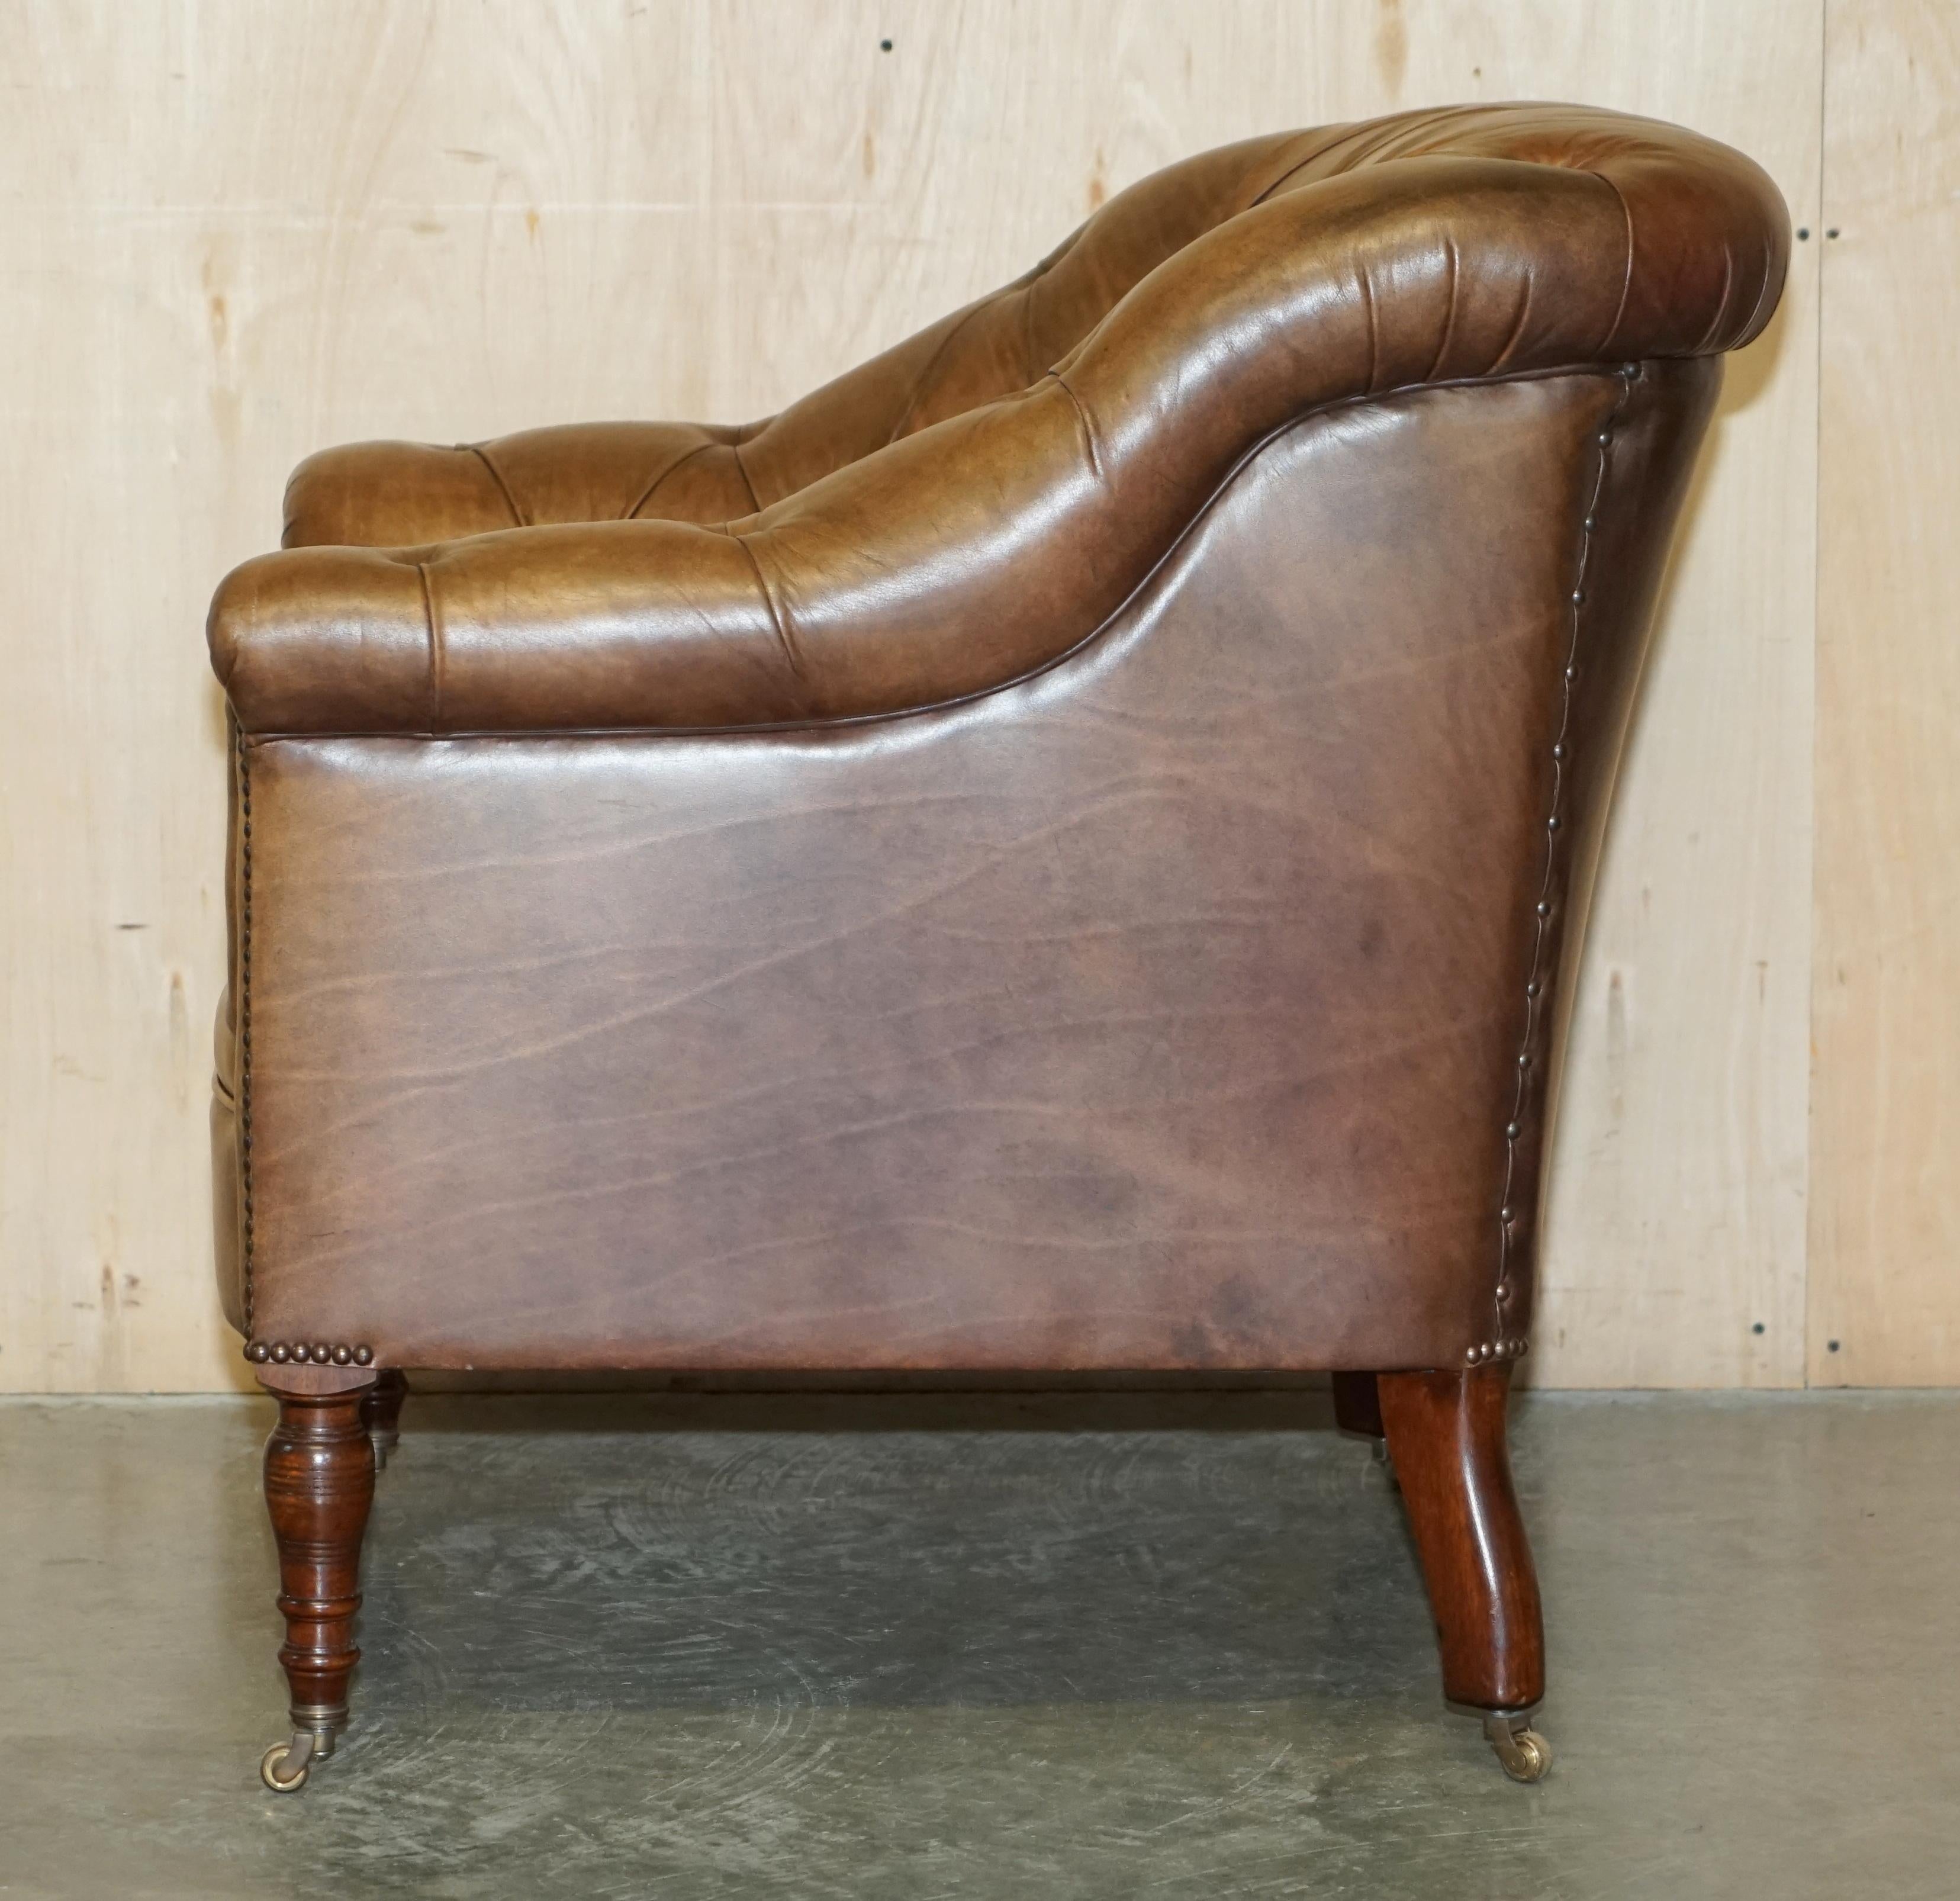  GEORGE SMiTH SOMERVILLE BROWN LEATHER CHESTERFIELD ARMCHAIR For Sale 10